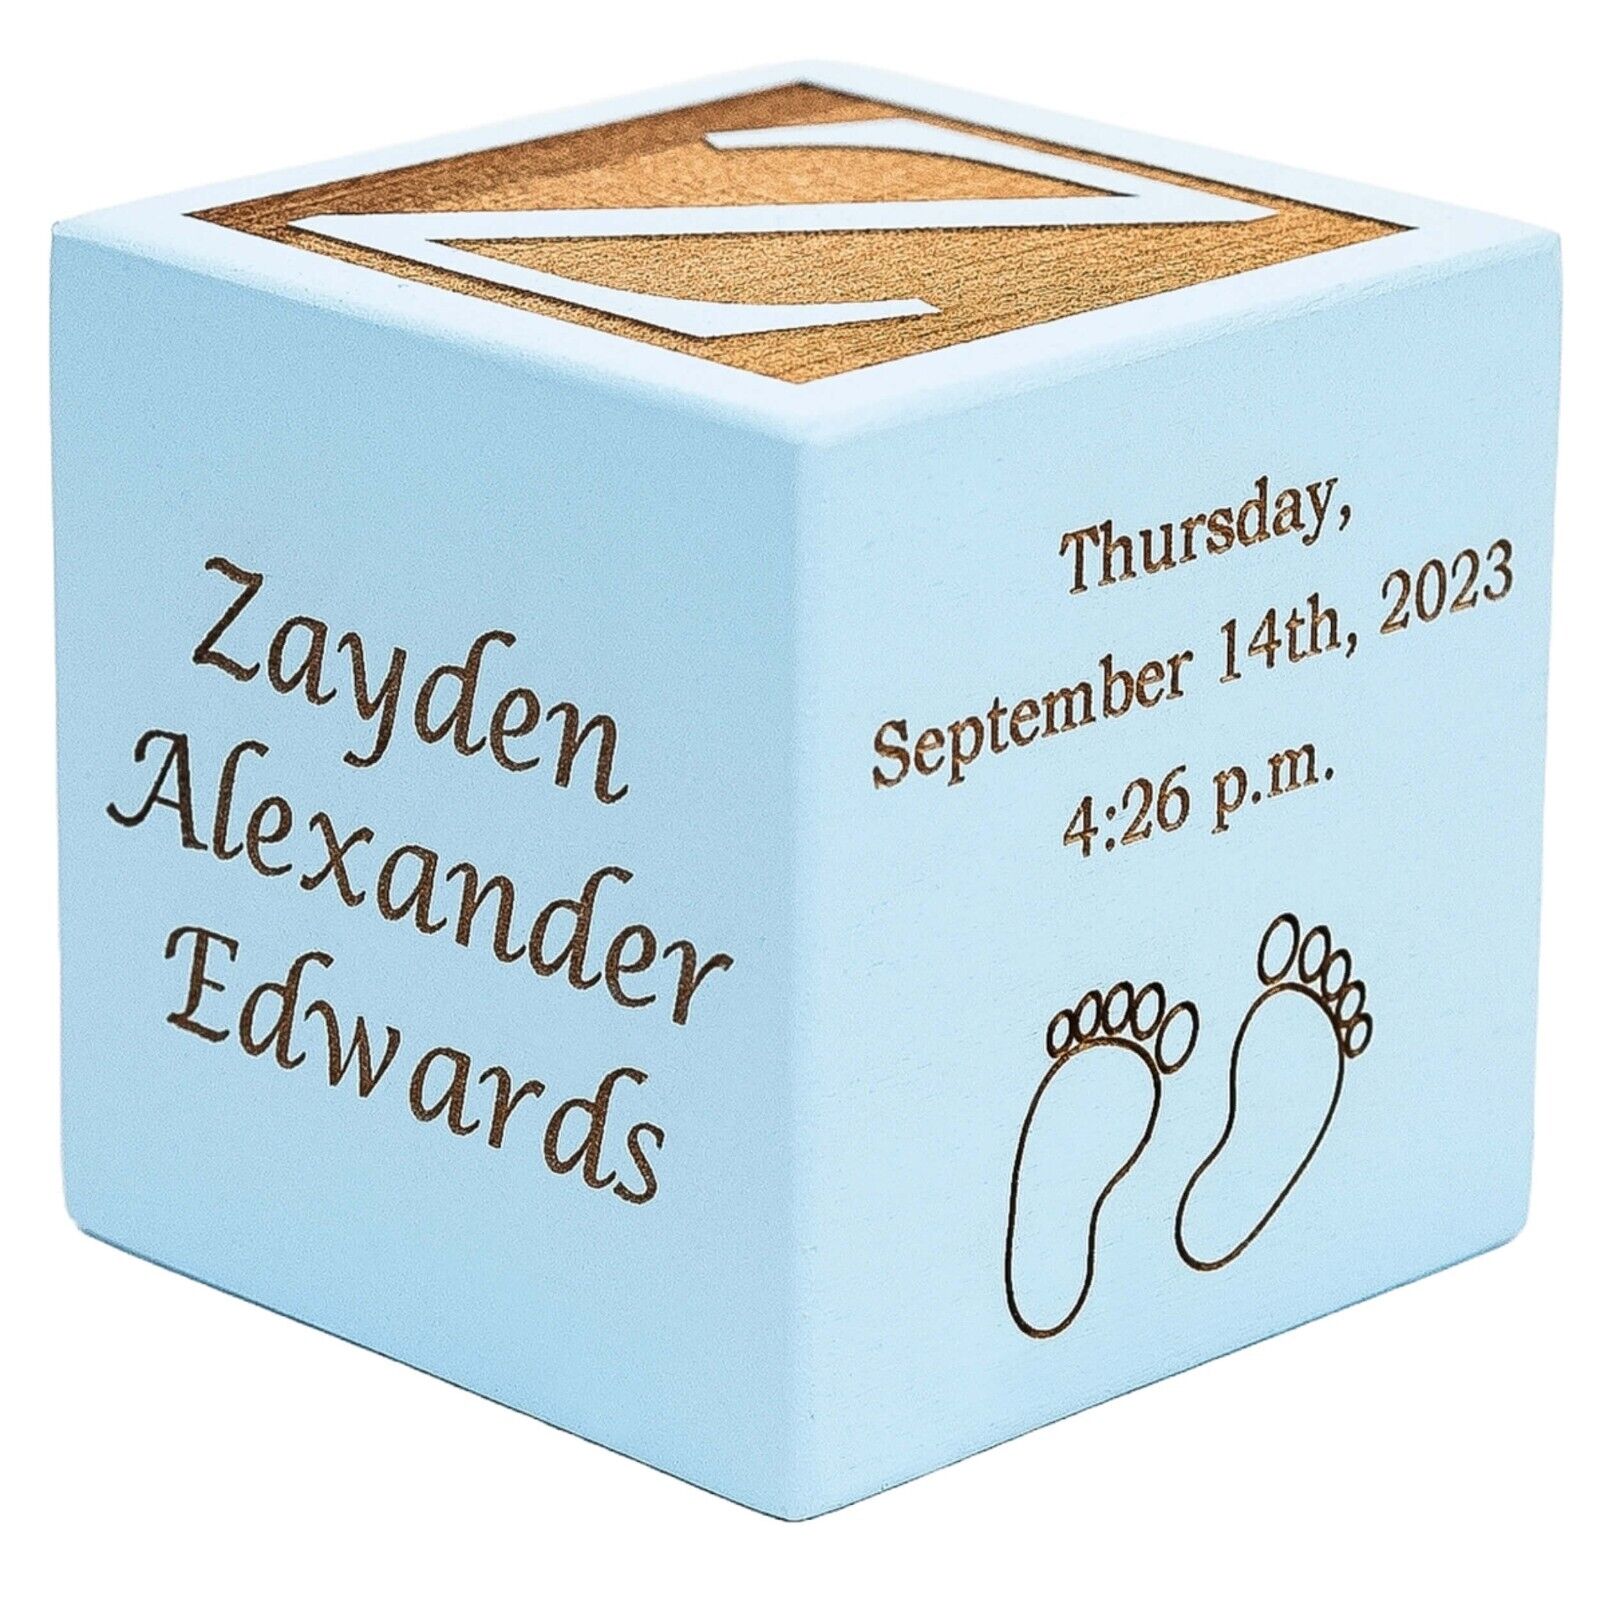 Personalized Wood Baby Birth Block, Laser Engraved, New Baby Gifts, Unique